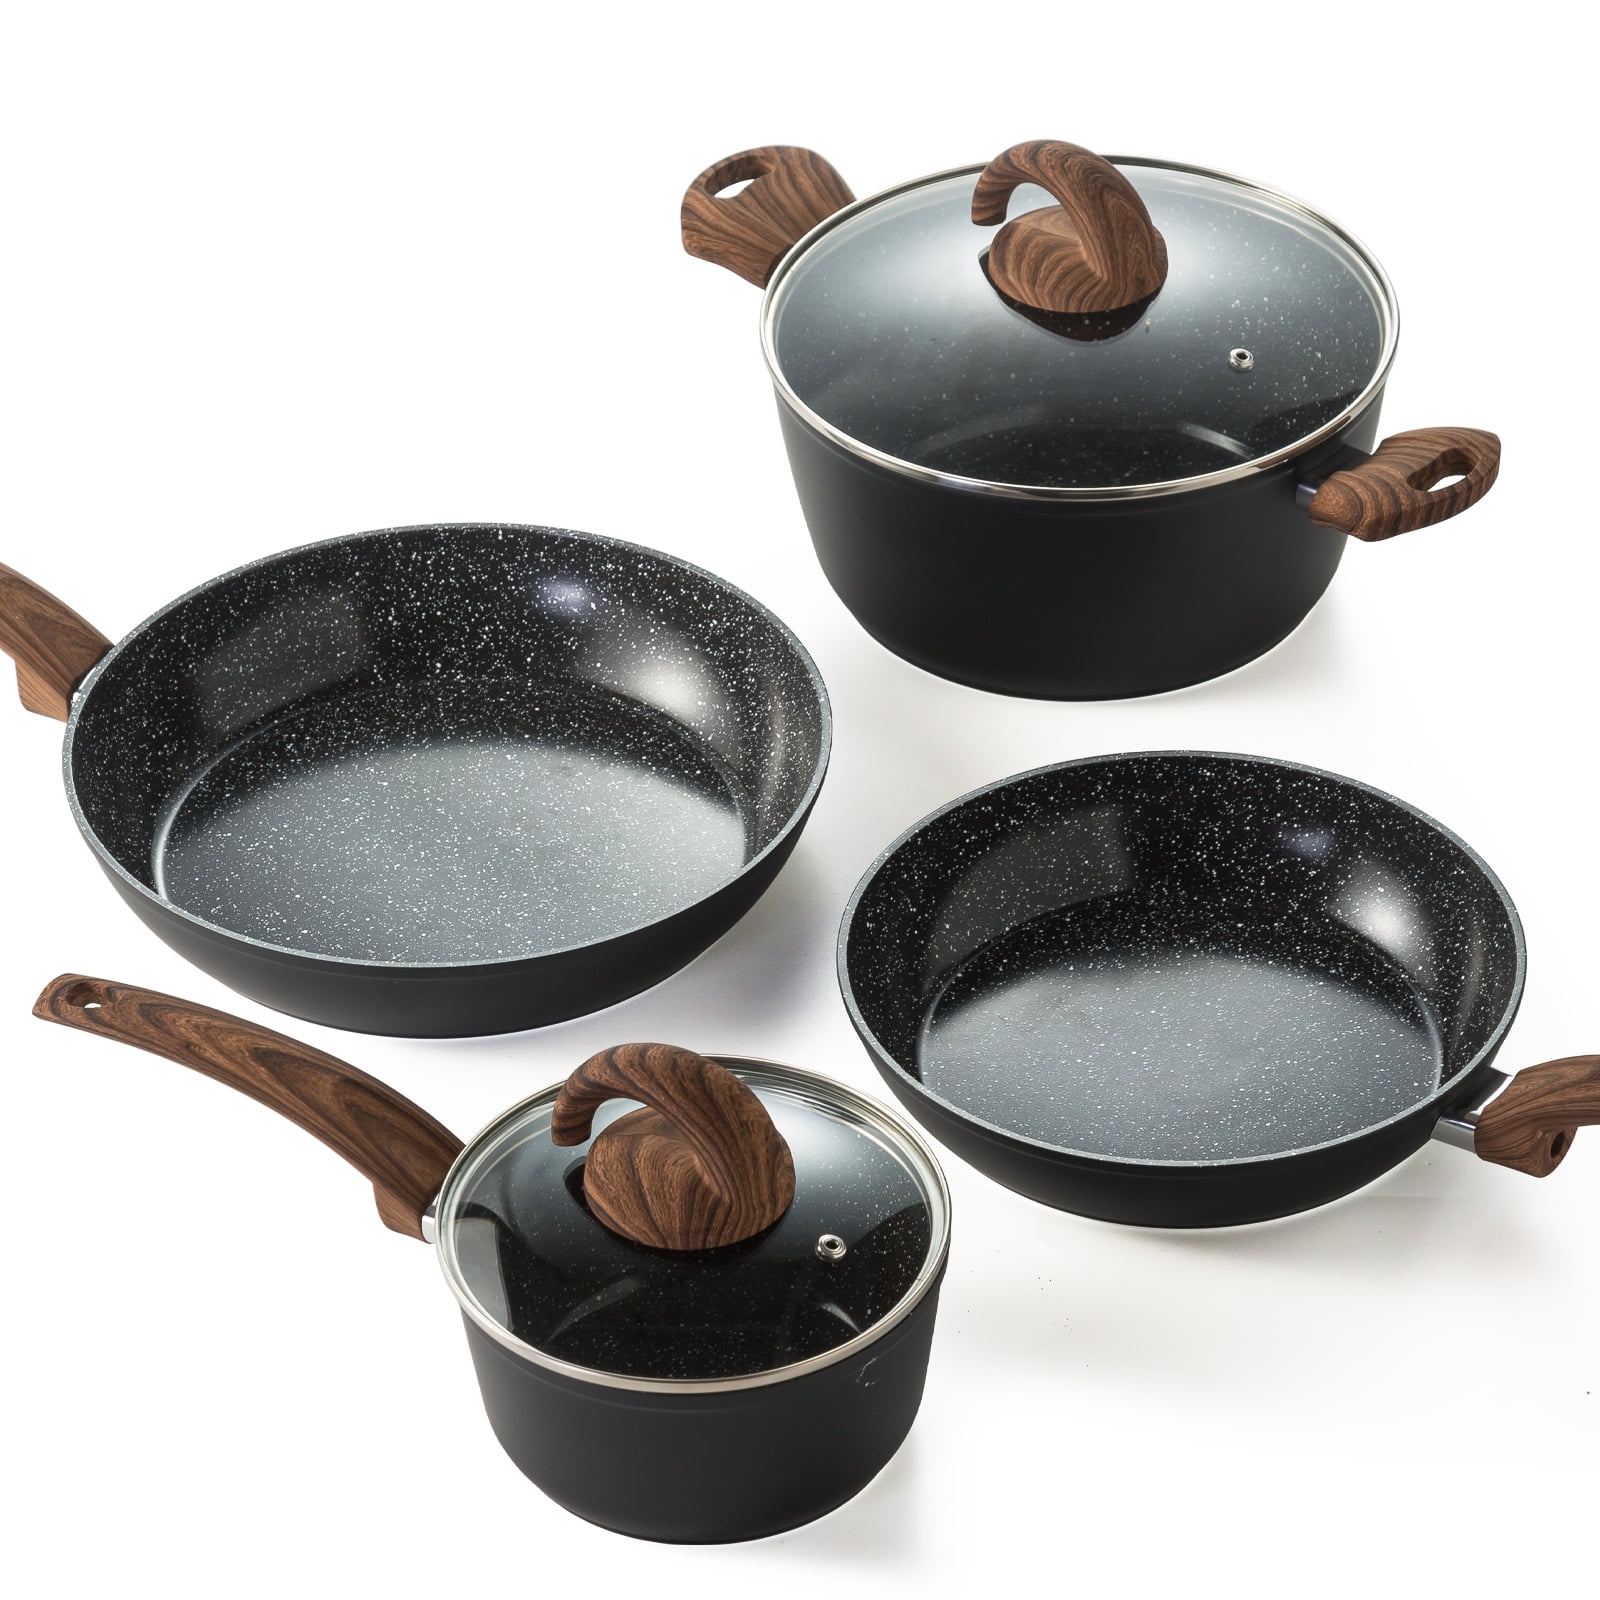 Vkoocy vkoocy pot and pan set with removable handle, nonstick